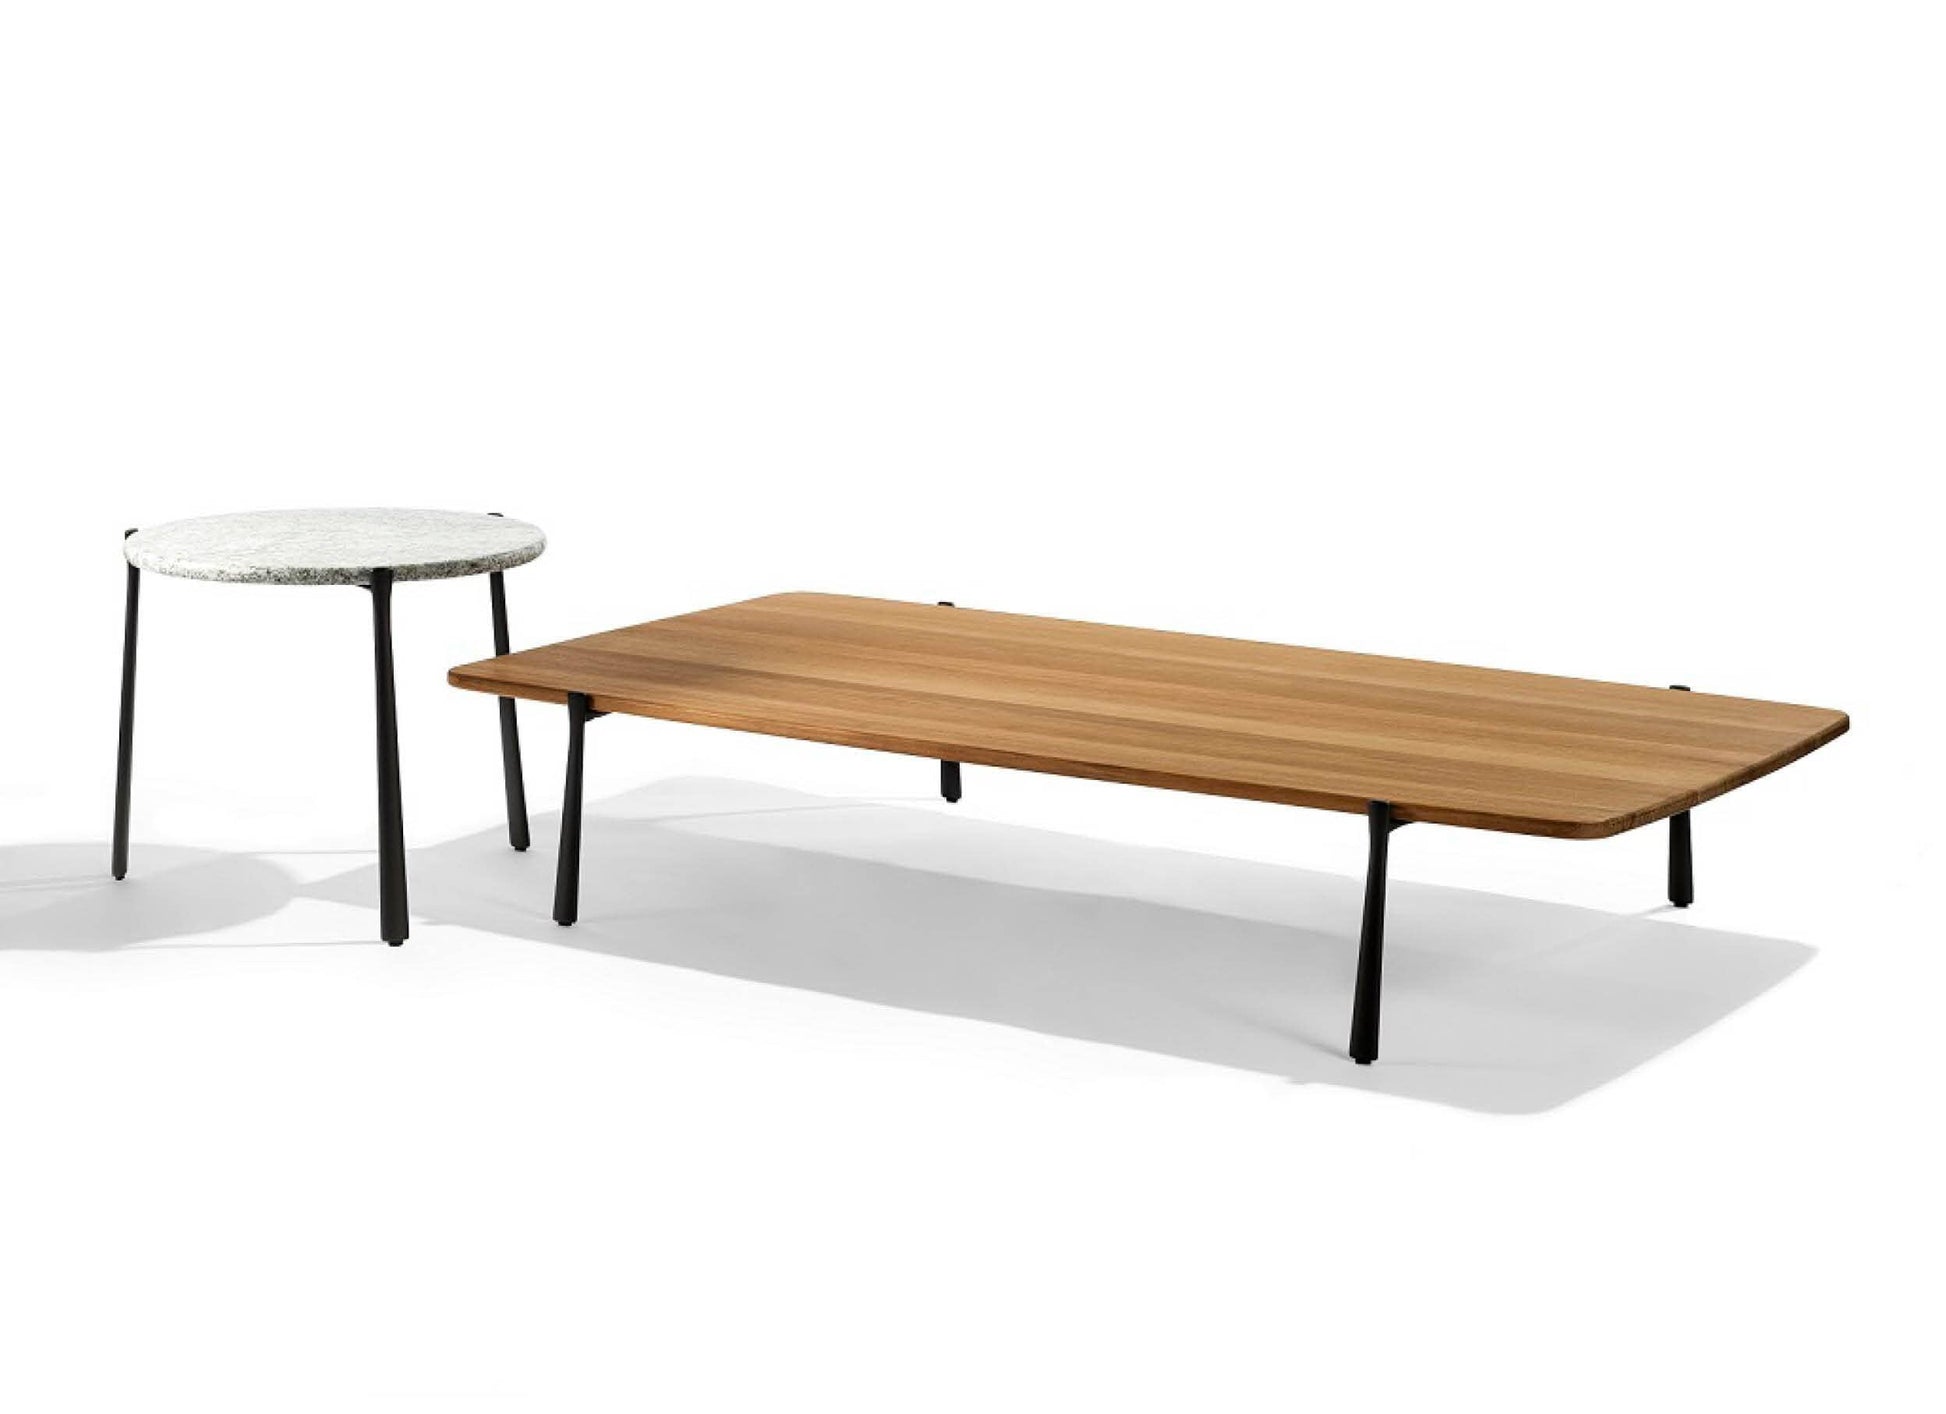 Branch Coffee Table Rectangular with Teak Top 20% Off Outdoor Furniture Tribu 